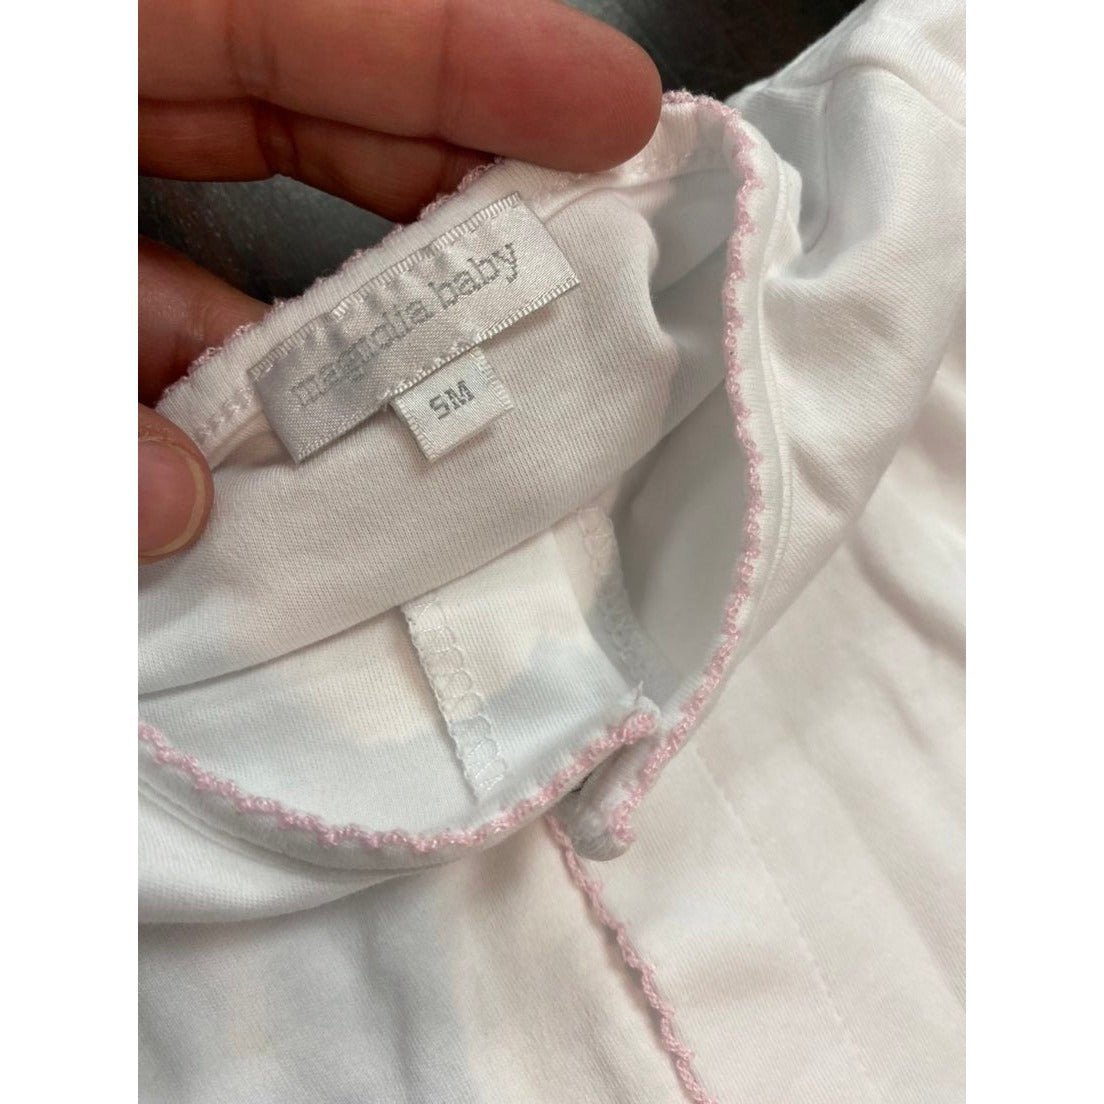 Small Magnolia baby convertible gown